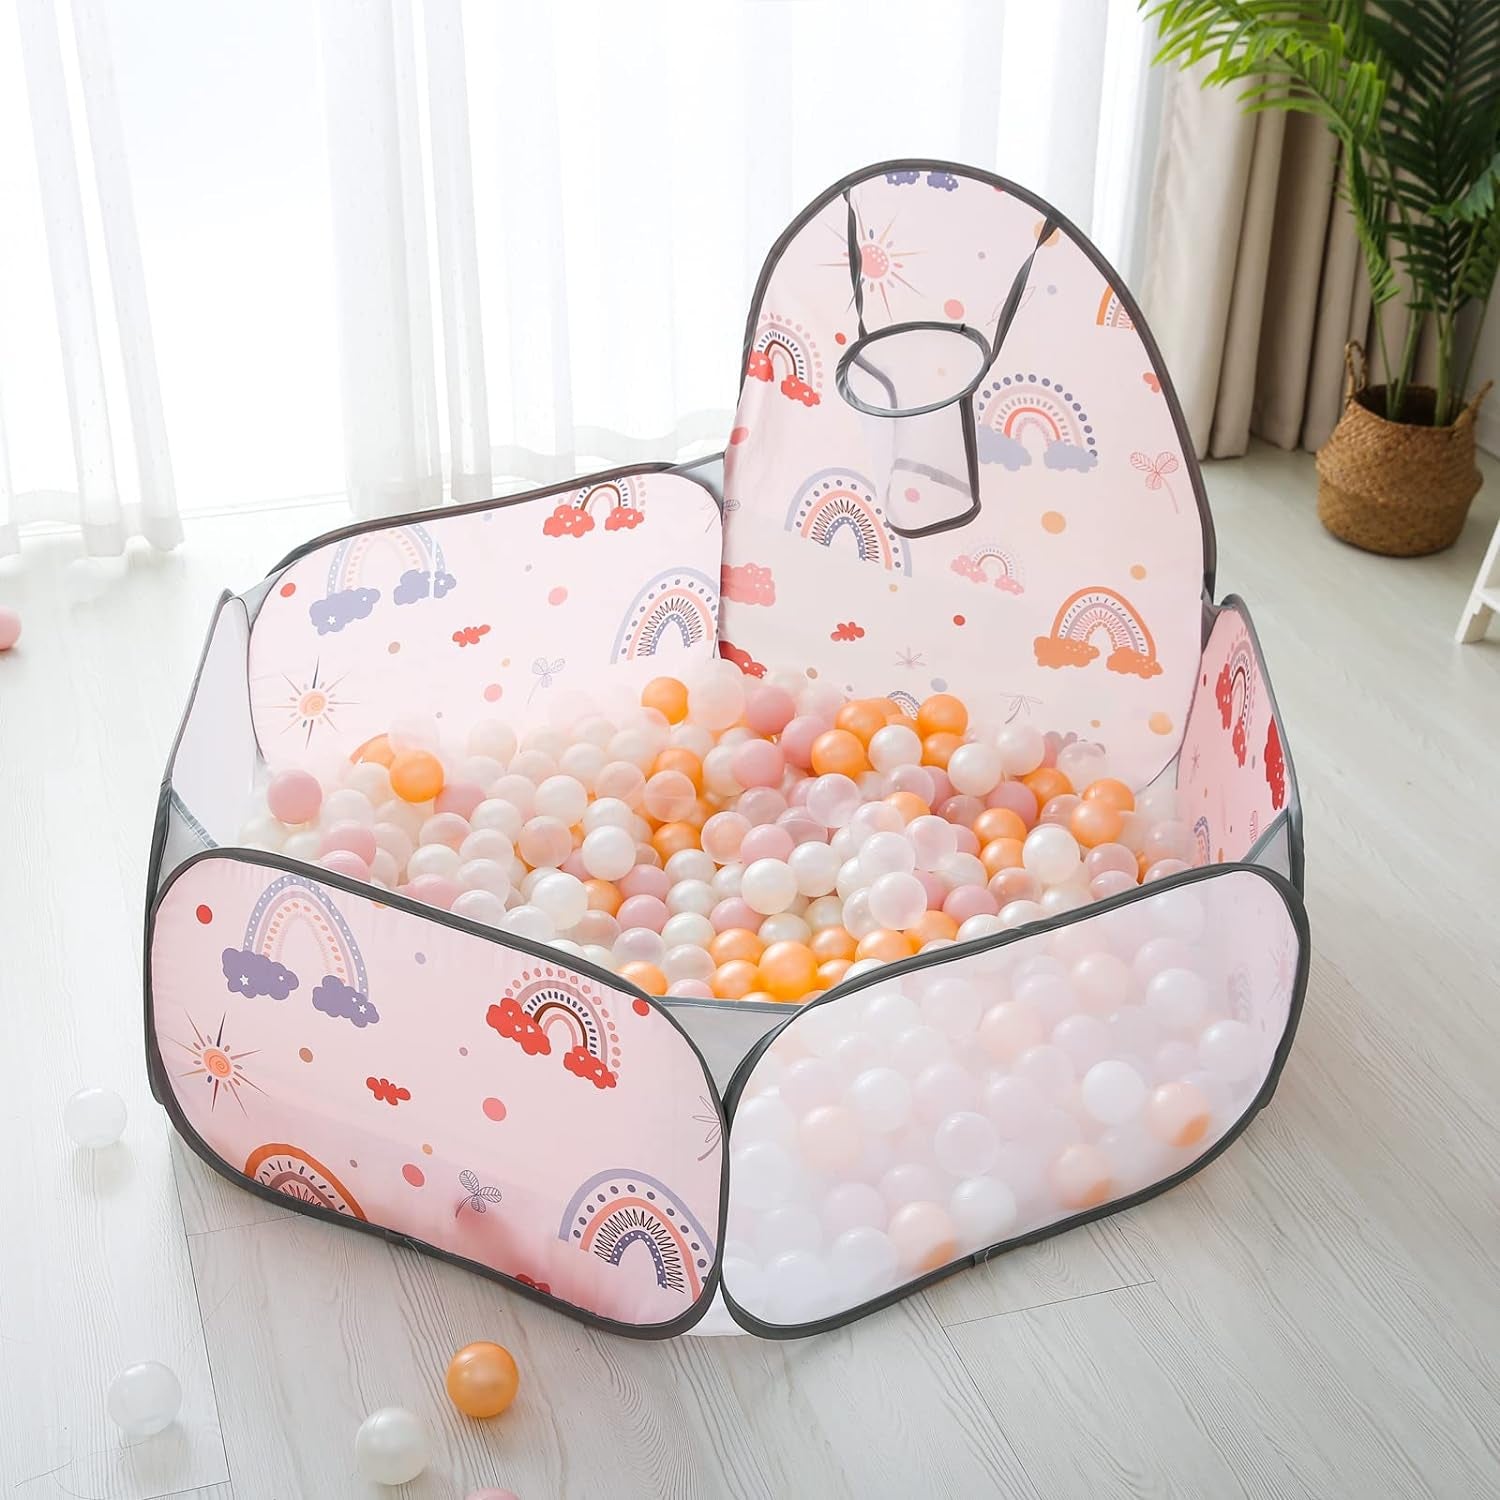 Pit Ball for Baby Toddlers Pet Fun Toys for Ball Pit Pool Playpen, Indoor Outdoor Play with Storage Bag, Pack of 100, Pink+Gold+White+Transparent （Ball Pit Not Include）